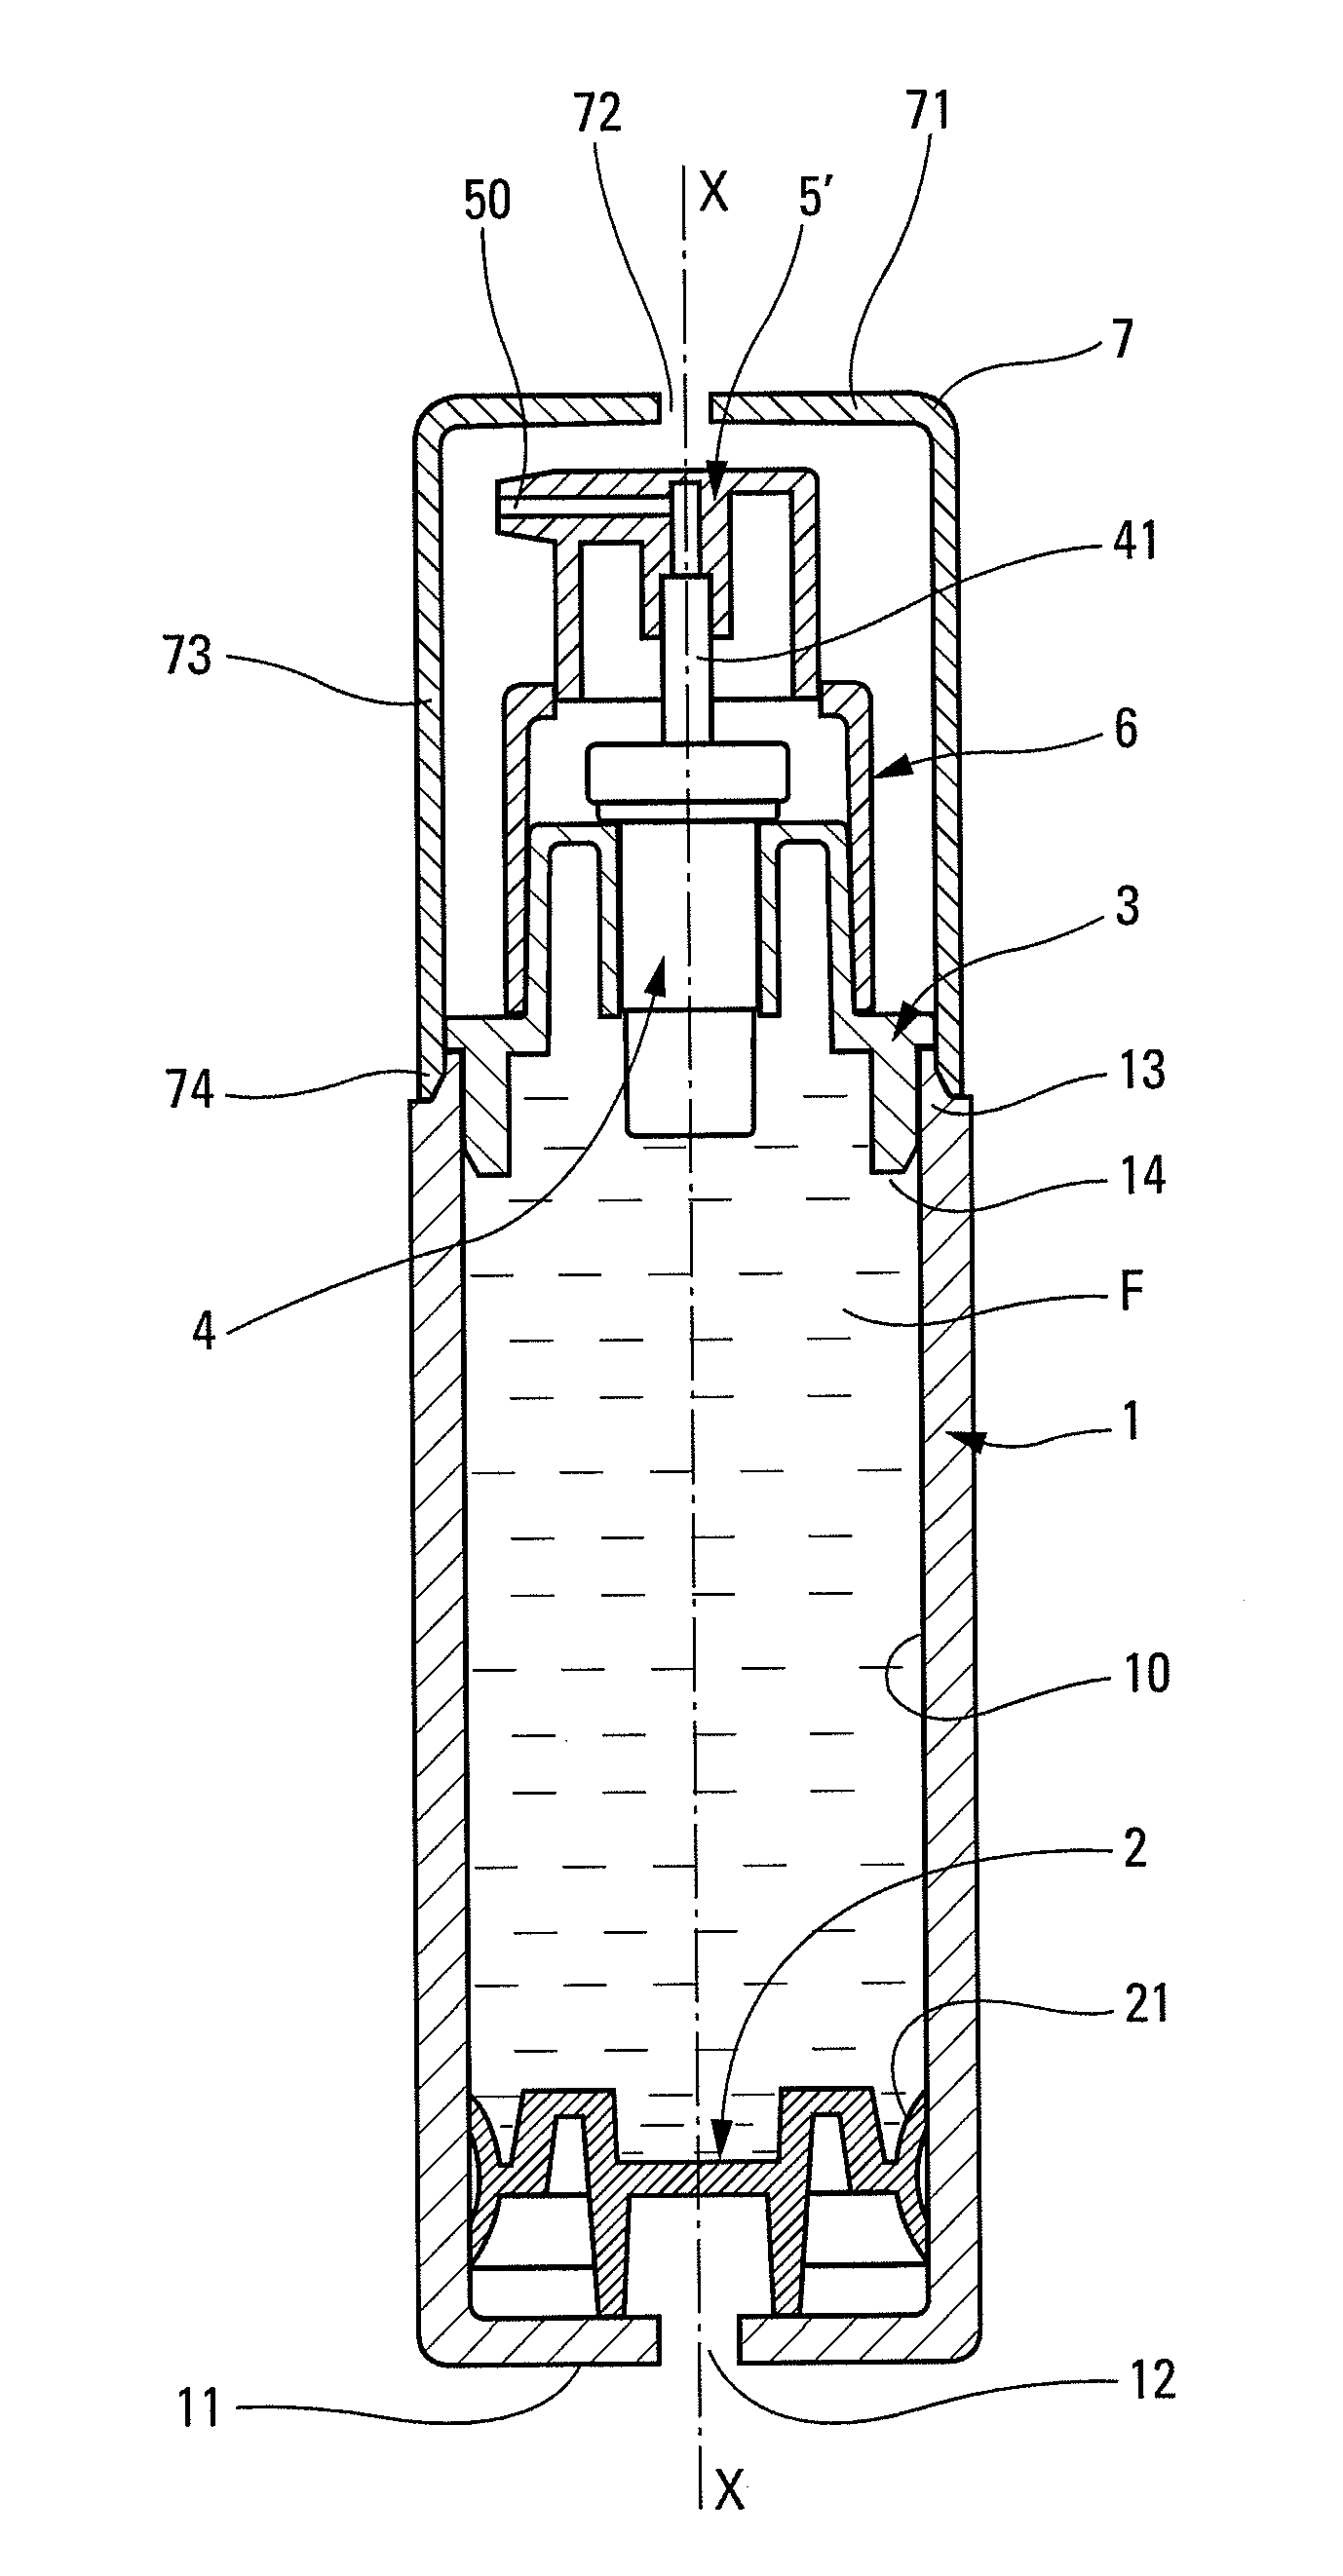 Method of molding a hollow body of revolution